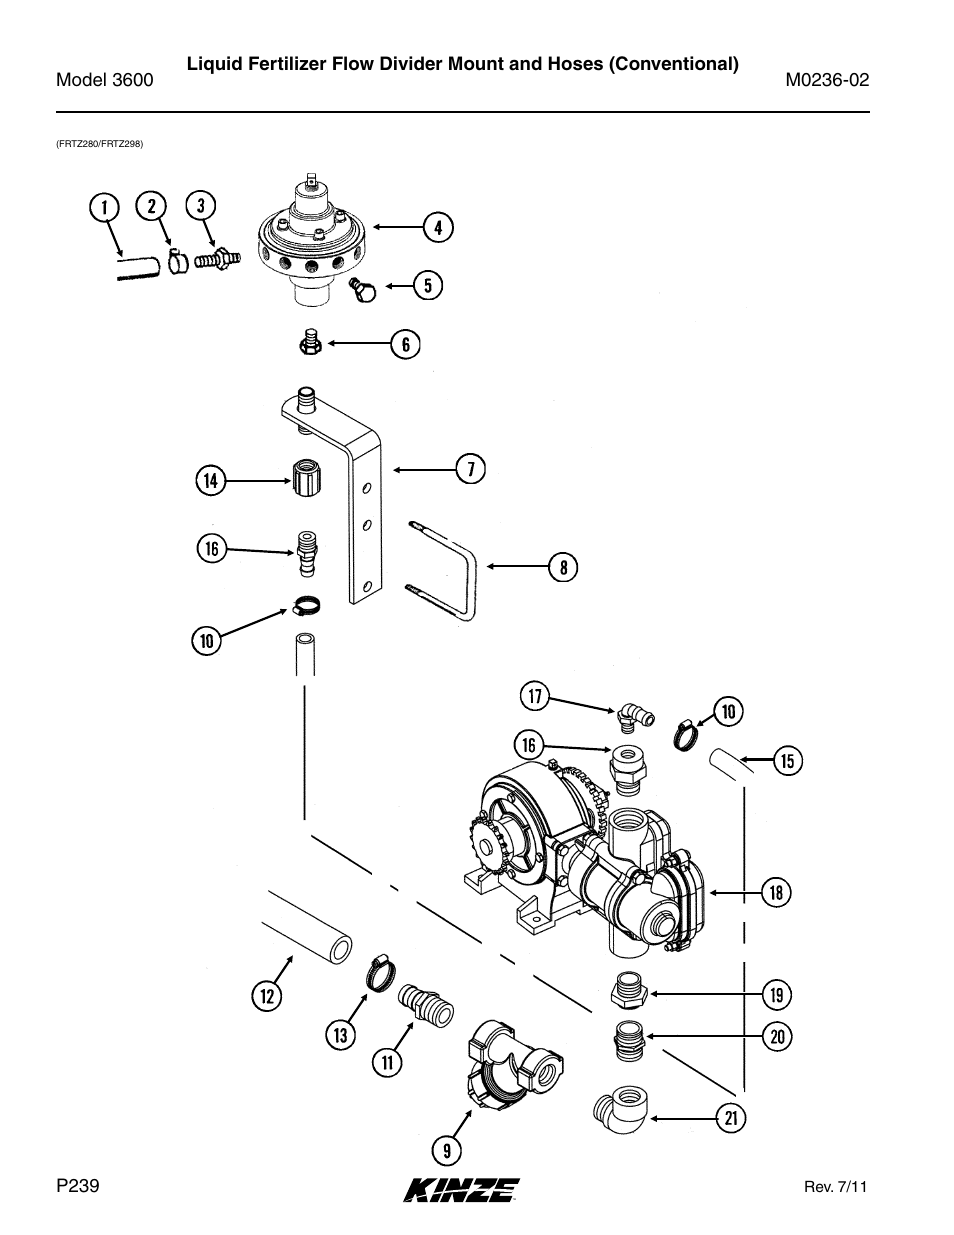 Liquid fertilizer flow divider mount and hoses | Kinze 3600 Lift and Rotate Planter Rev. 5/14 User Manual | Page 242 / 302